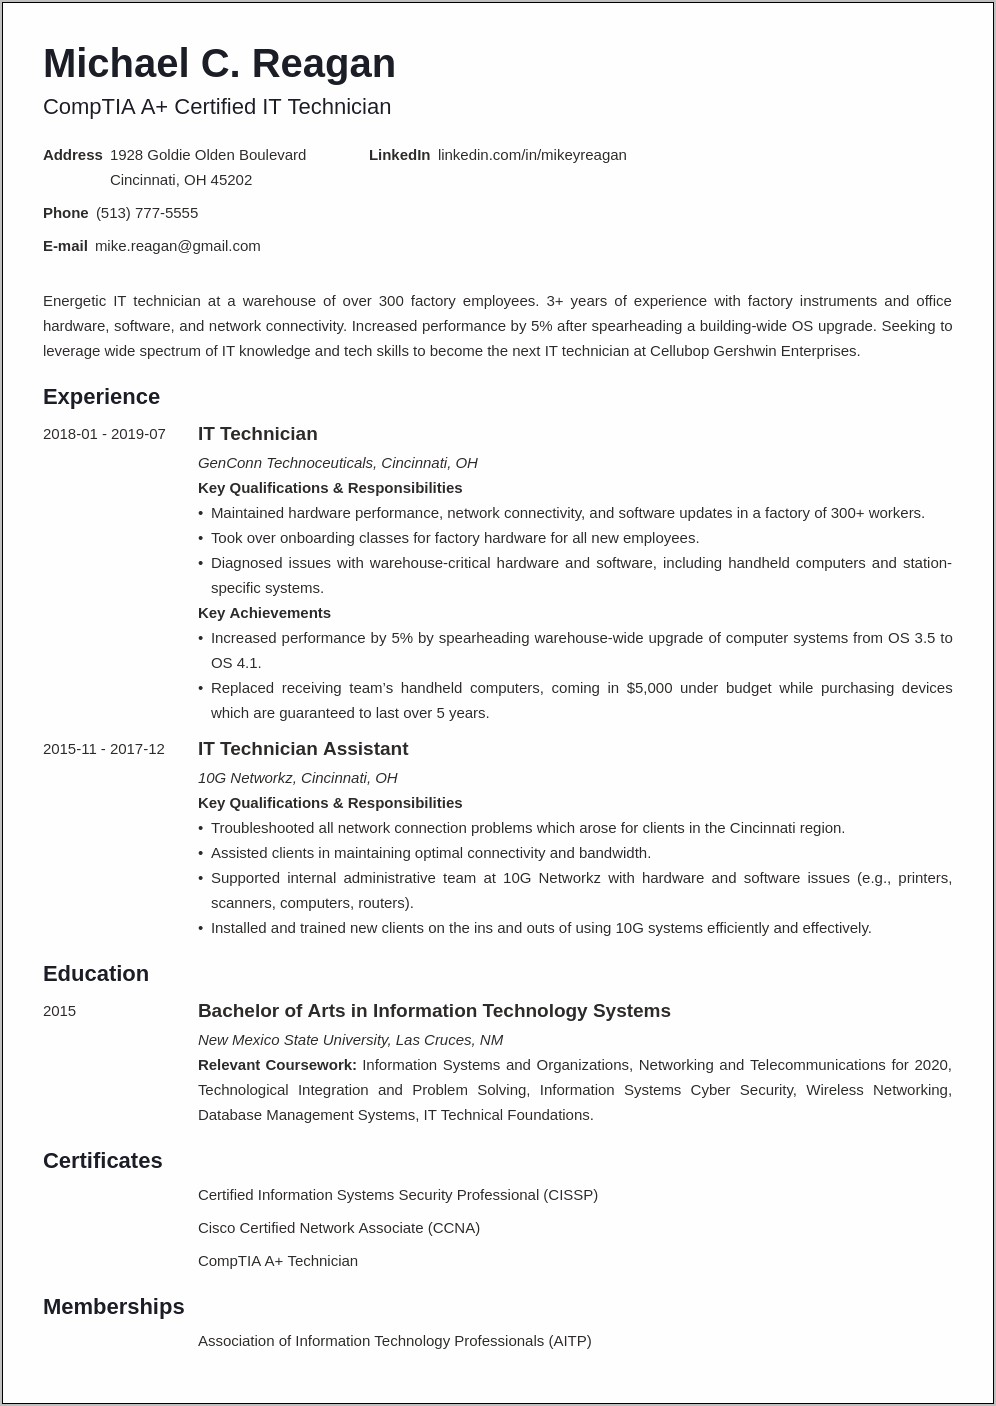 Resume Summary Examples For Computer Technicians